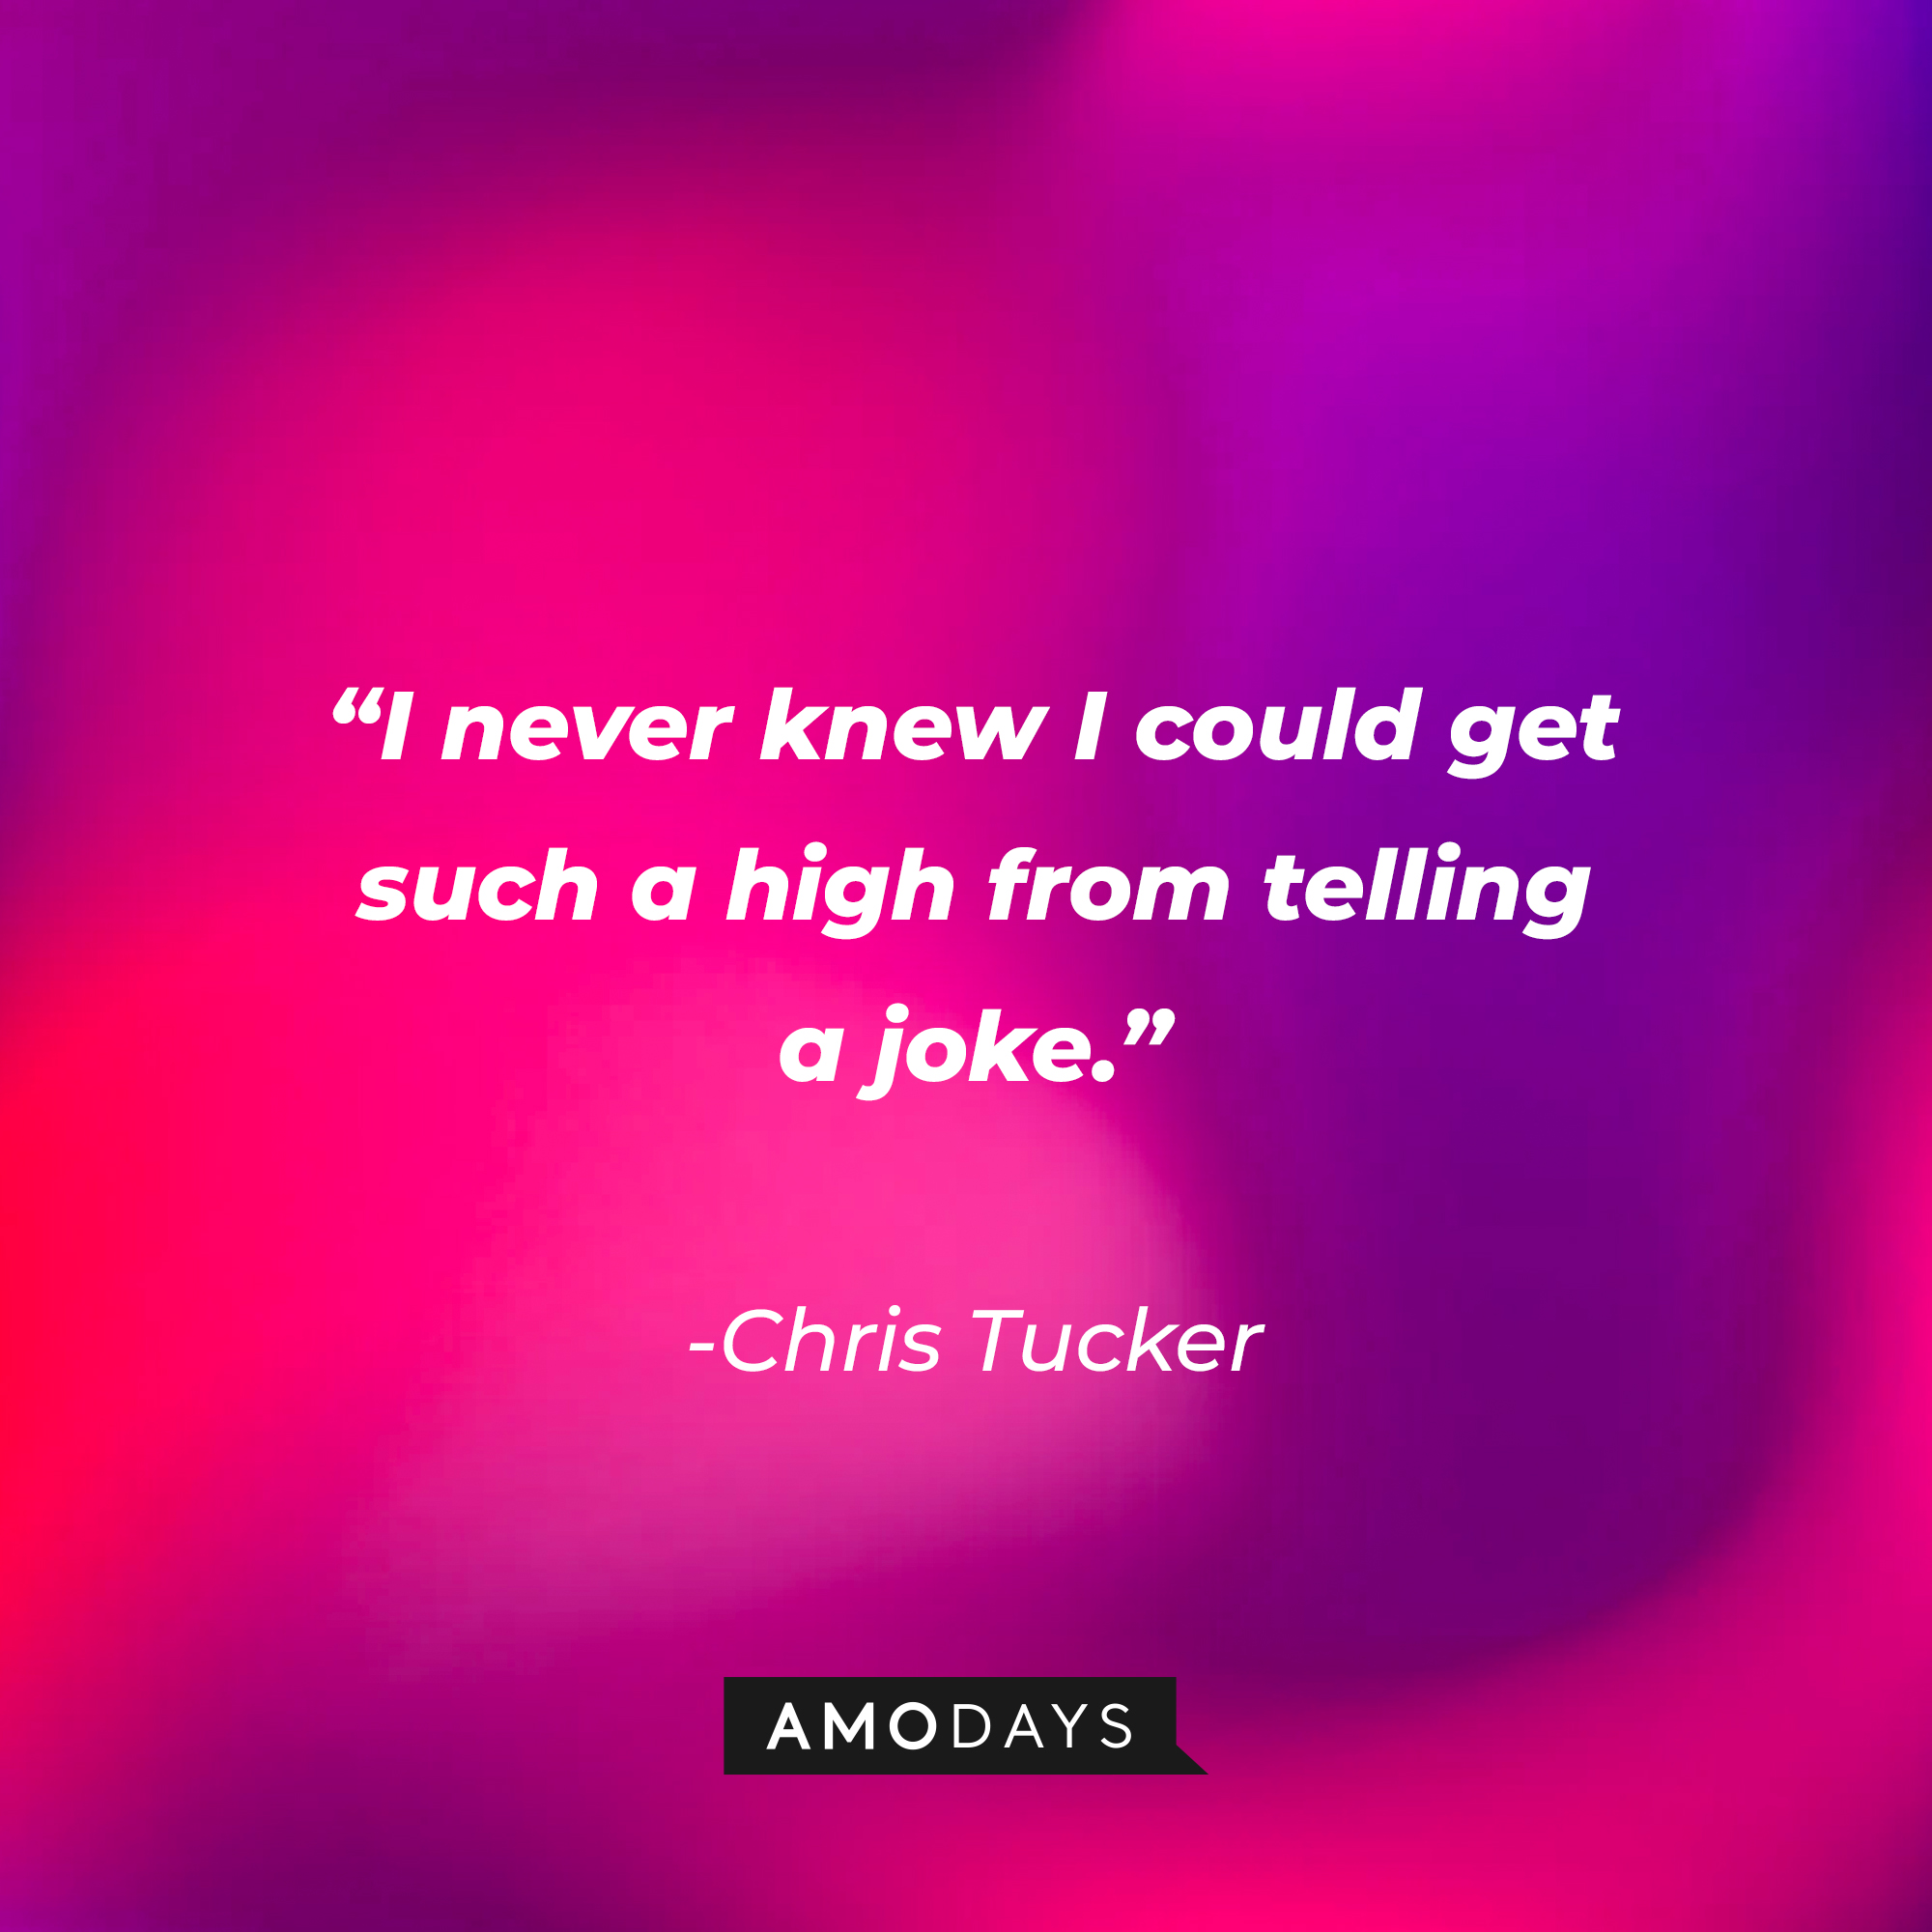 Chris Tucker’s quote: “I never knew I could get such a high from telling a joke.”┃Source: AmoDays